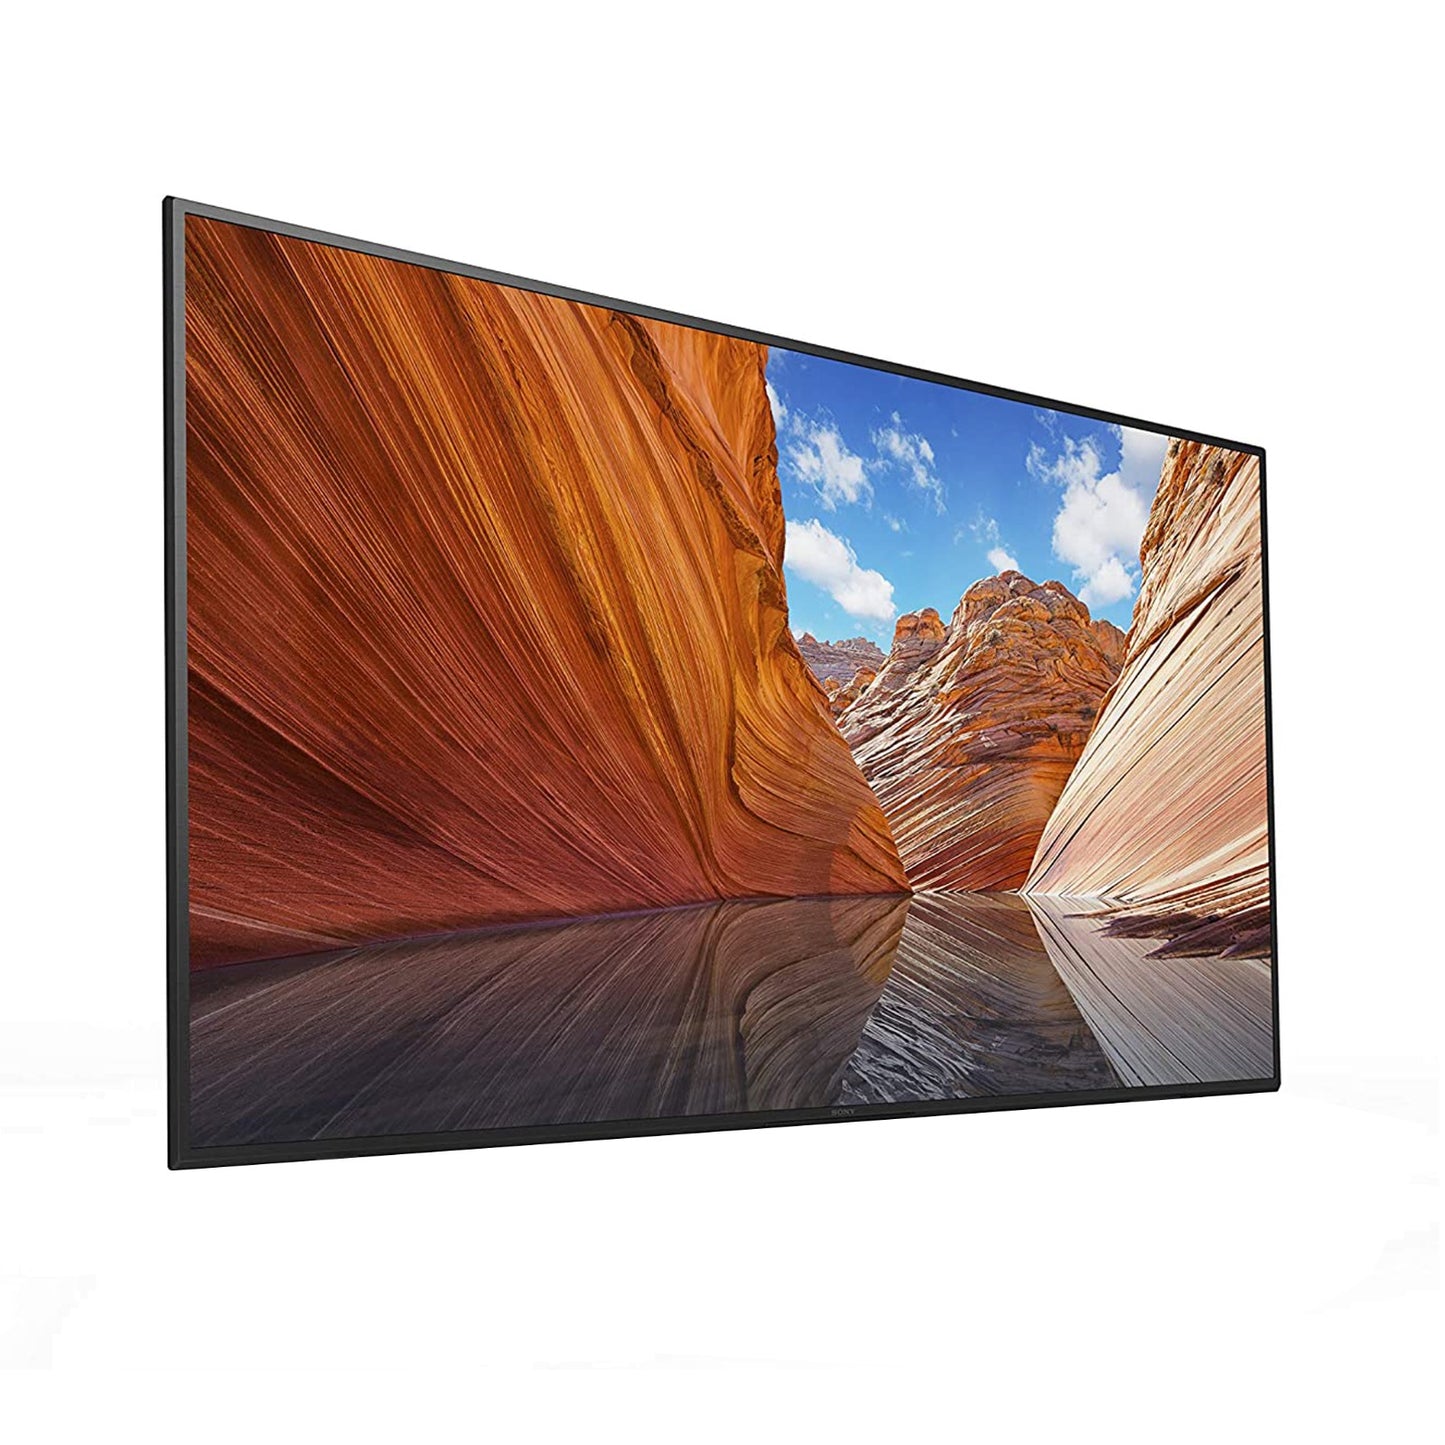 Sony 65" Android Smart TV - 4K, 65X75K